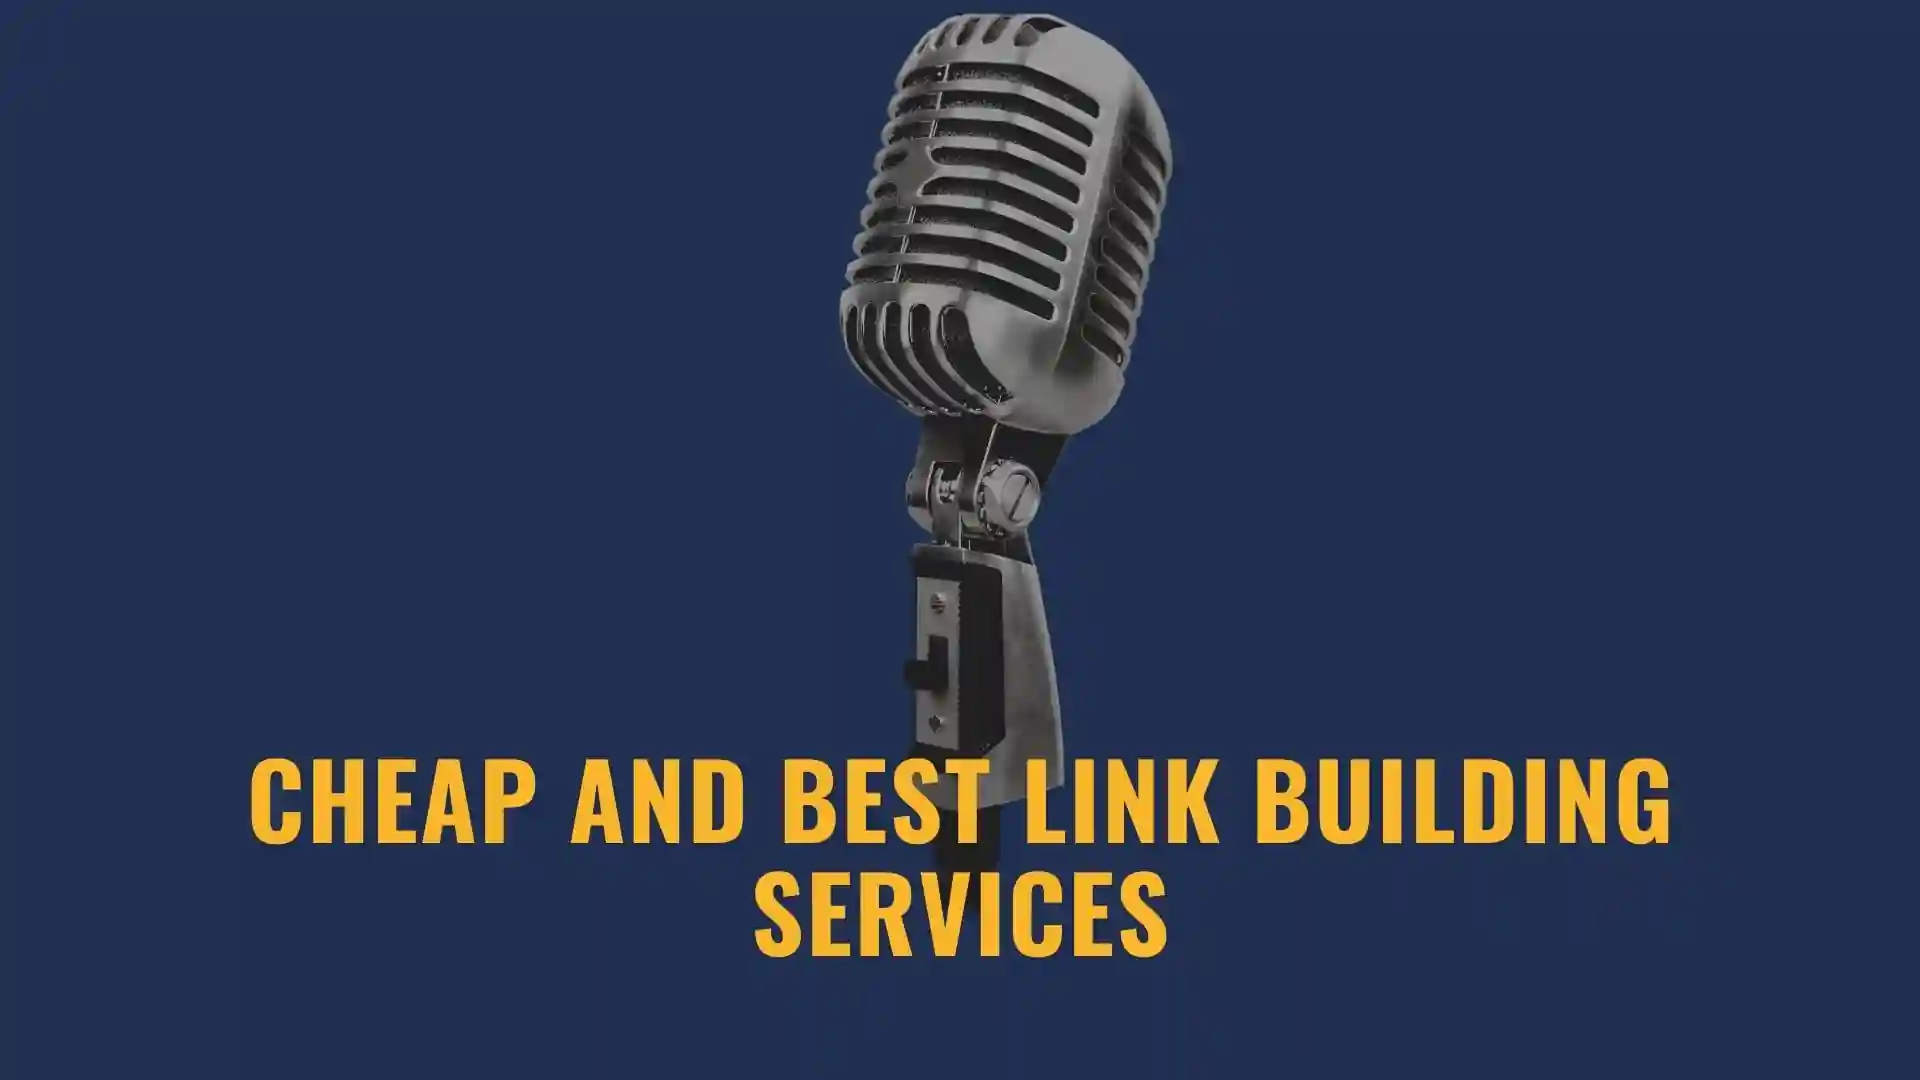 27 - Get The Best Services From Link Building Company